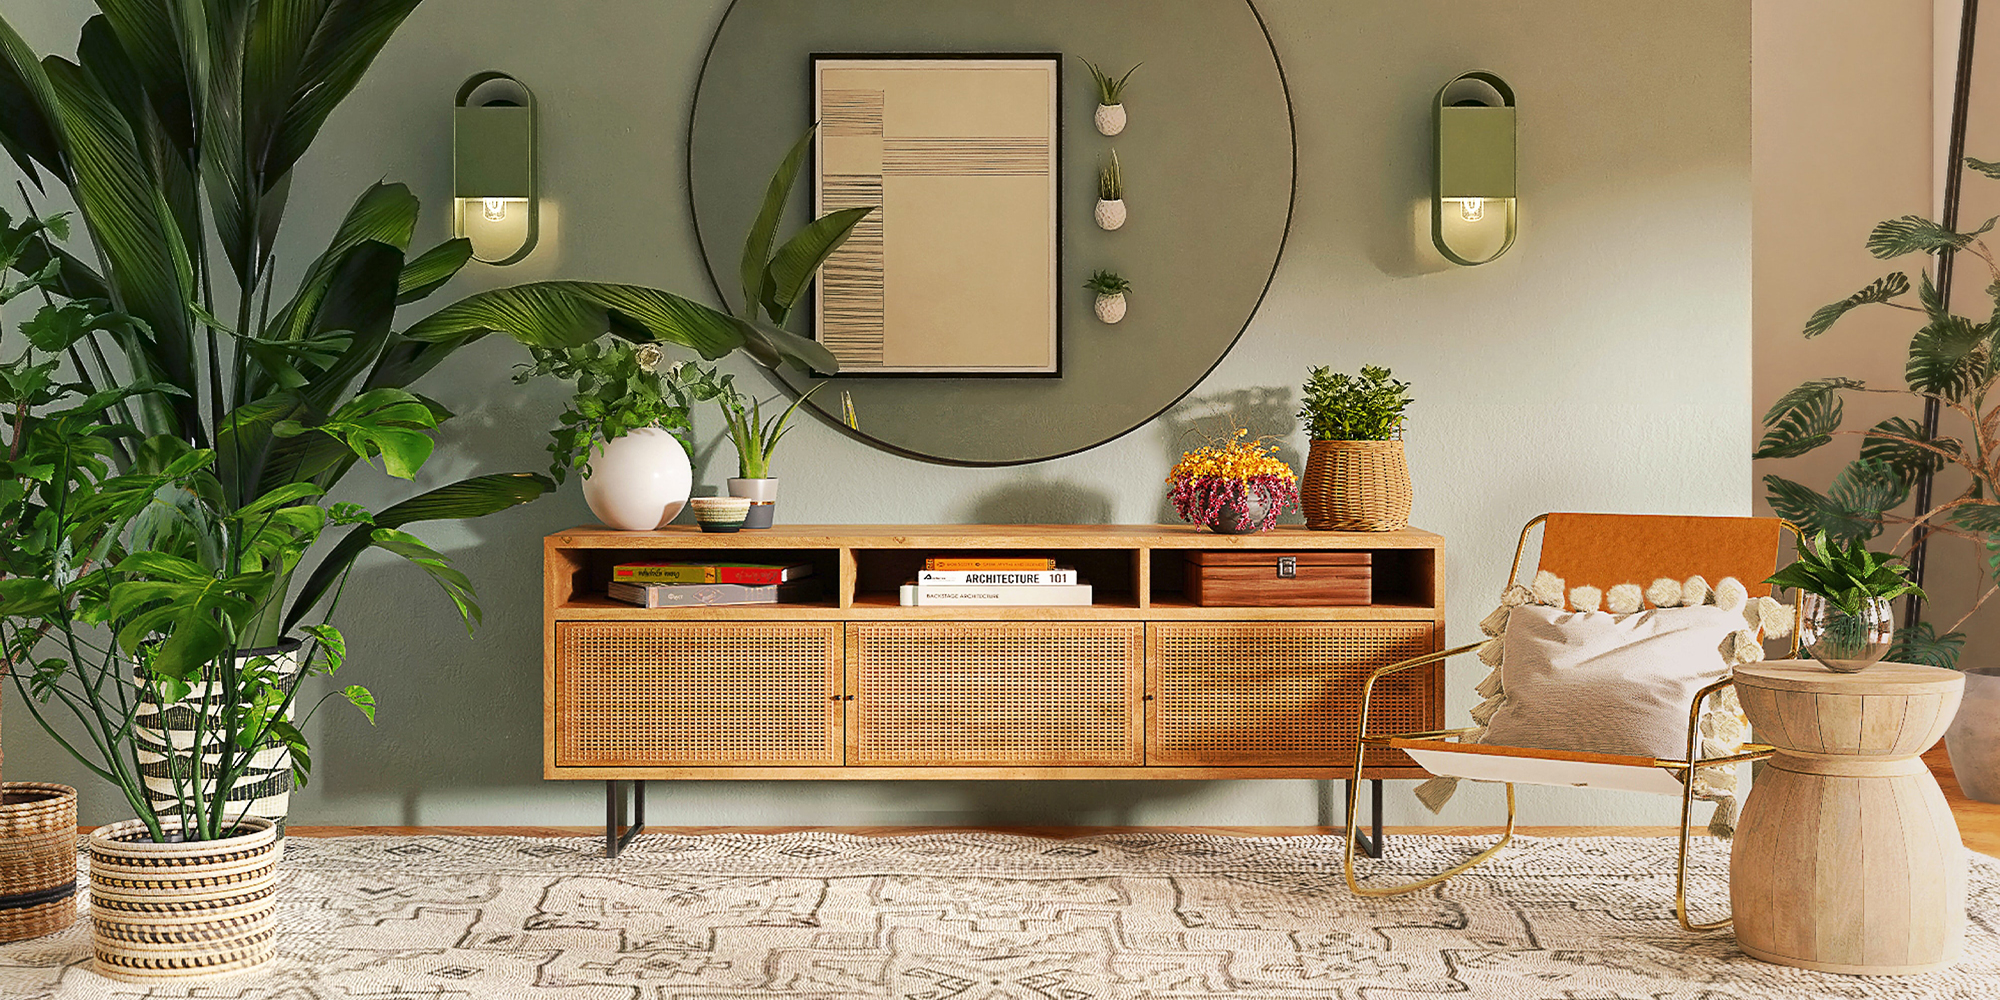 credenza with large round mirror above it, a wall sconce and a large leaf plant next to it.